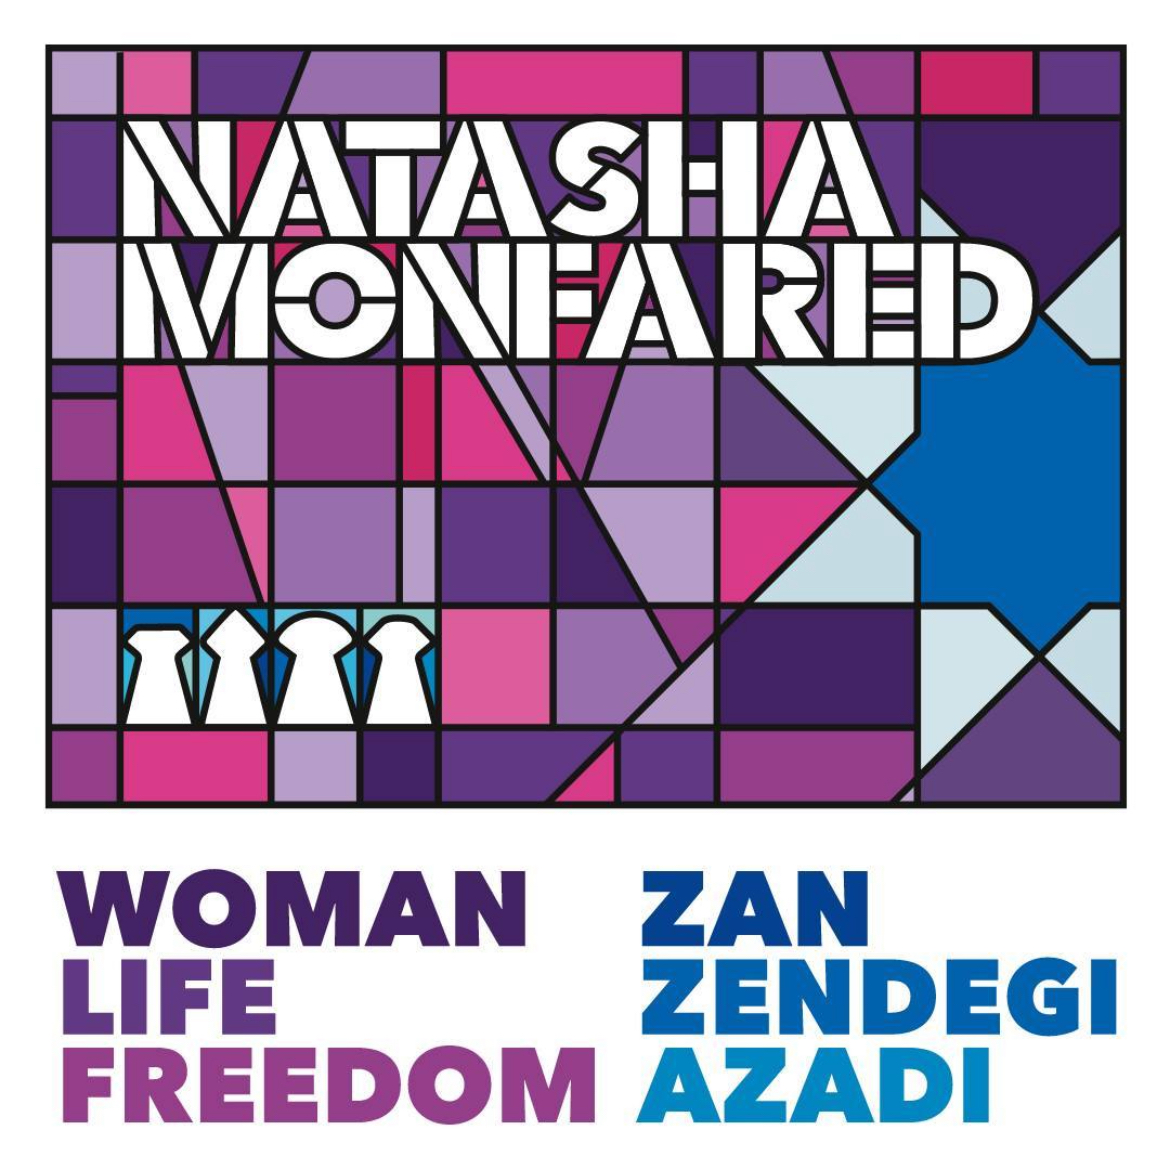 Don't miss your chance to experience Natasha Monfared's thought-provoking exhibition at Artlink Hull! 'Woman Life Freedom | Zan Zendegi Azadi' explores the intersection of art, heritage, and activism. 

#ArtLinkExhibition #NatashaMonfared #SupportLocalArt